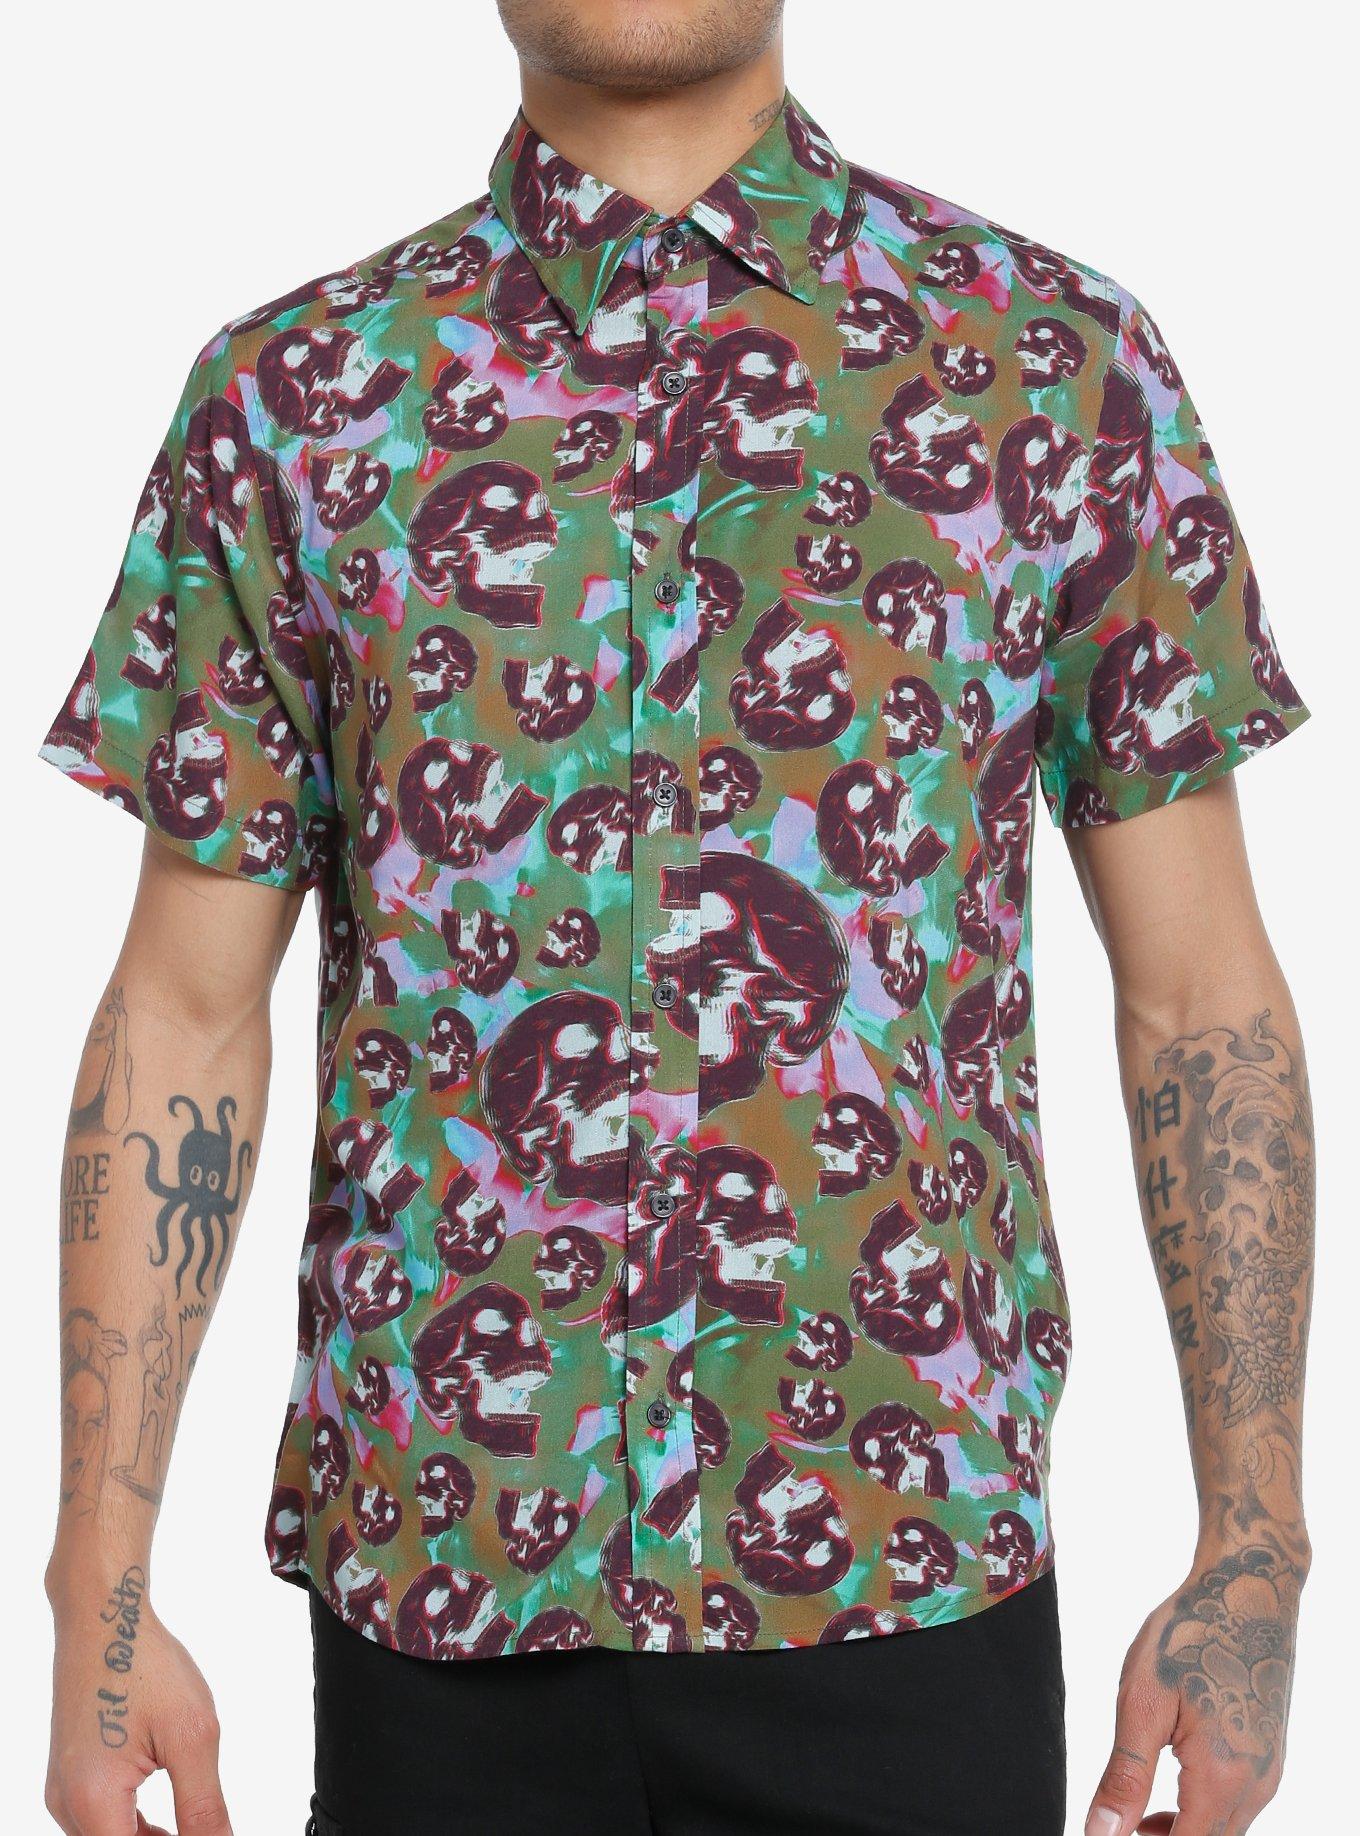 Screaming Skulls Woven Button-Up, MULTI, hi-res